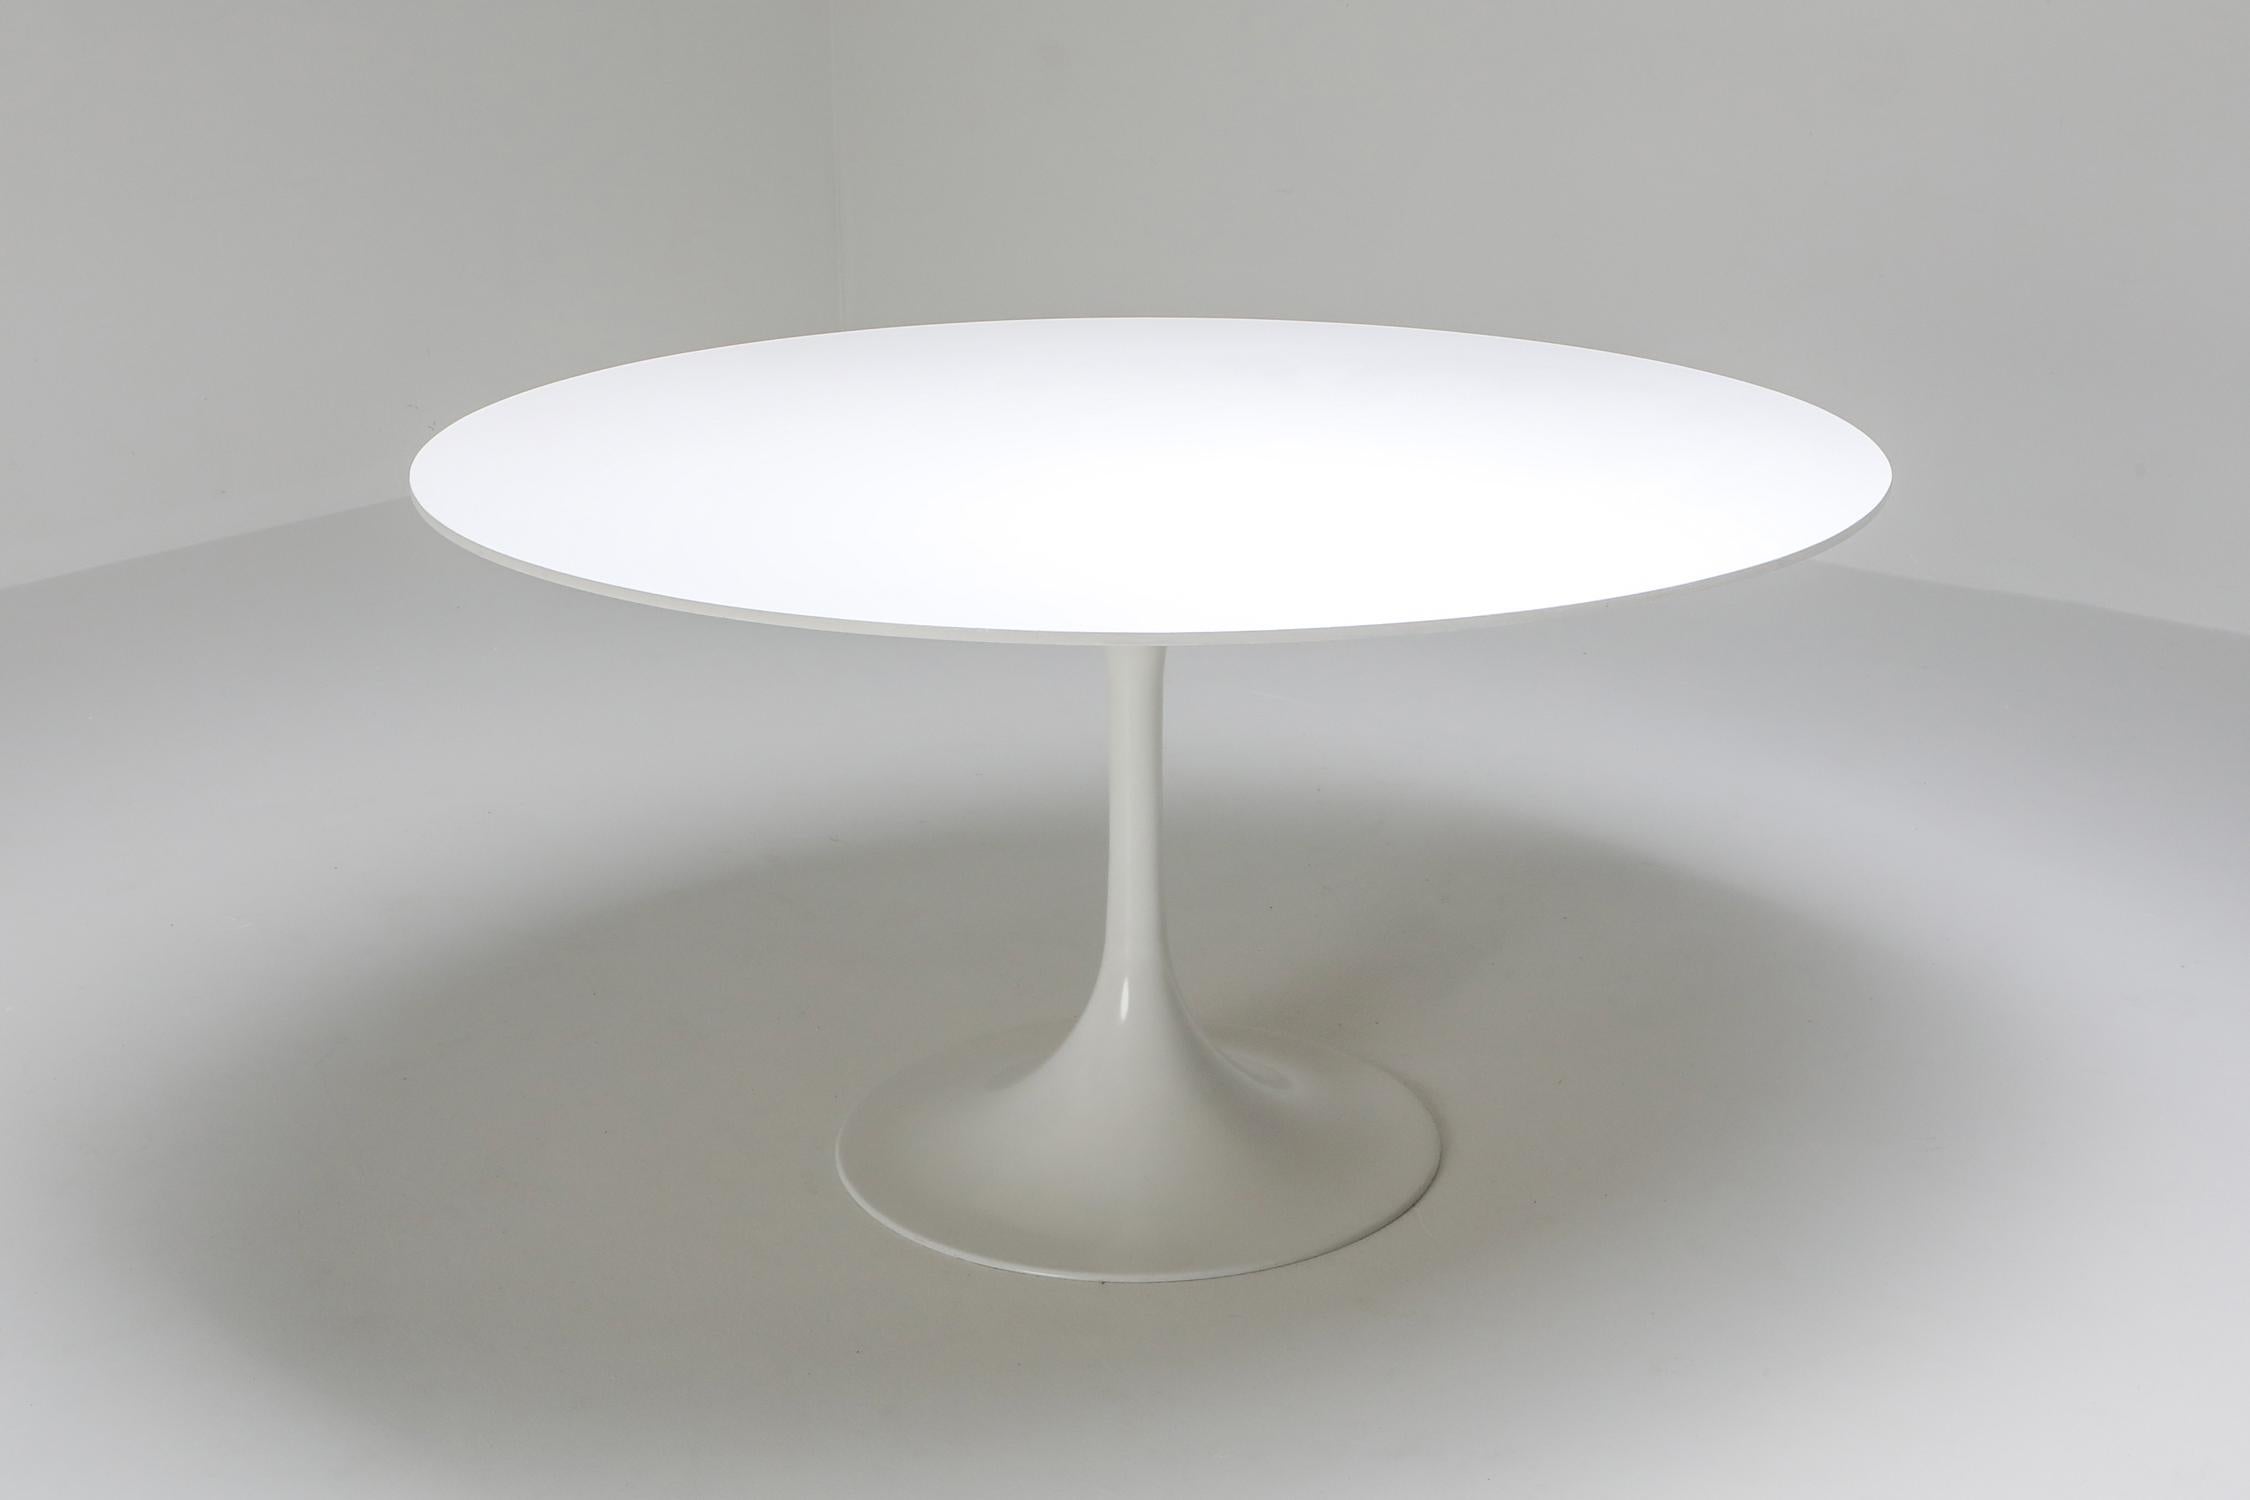 Knoll International large round white dining table by Eero Saarinen, United States, 1970s. This design Classic is made with aluminum base and a laminate top. The chairs in the pictures are dining chairs by Alejandro Estrada for Piegatto.